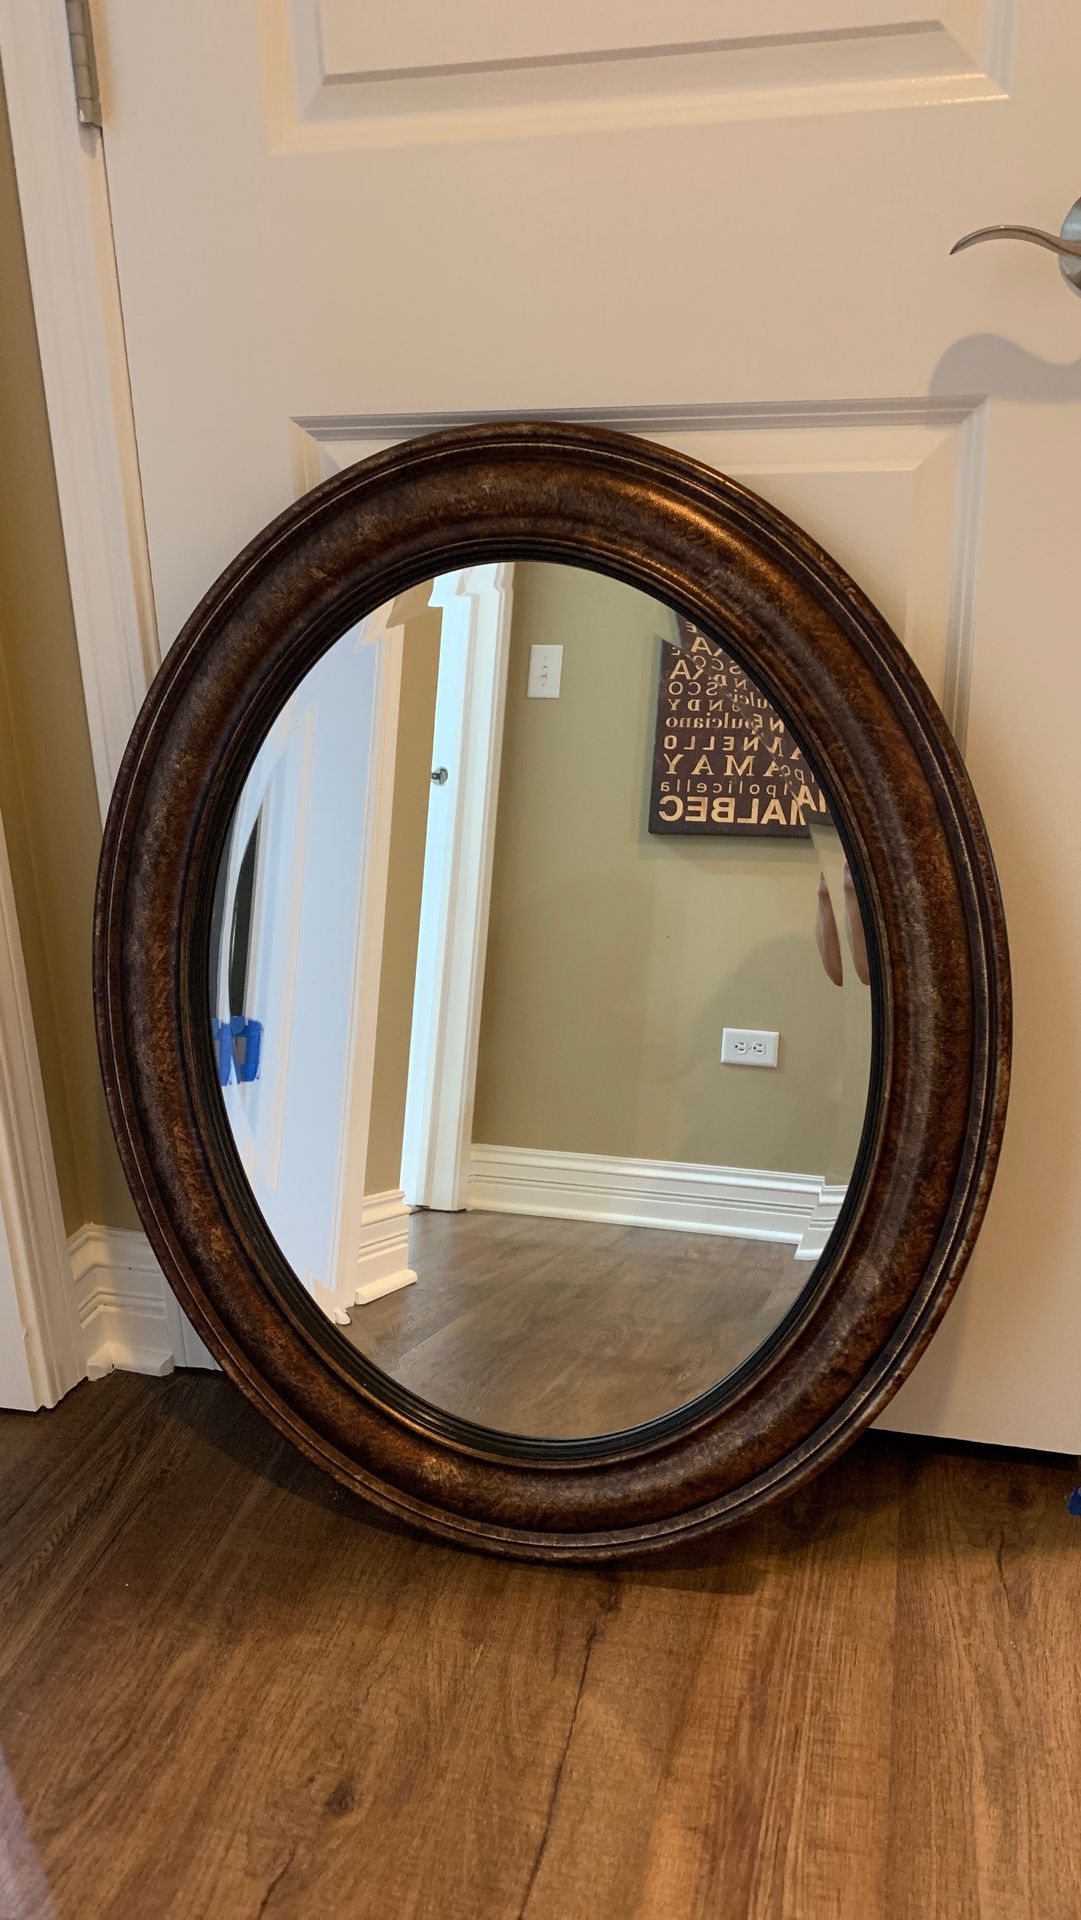 BRONZE AND BLACK OVAL MIRROR